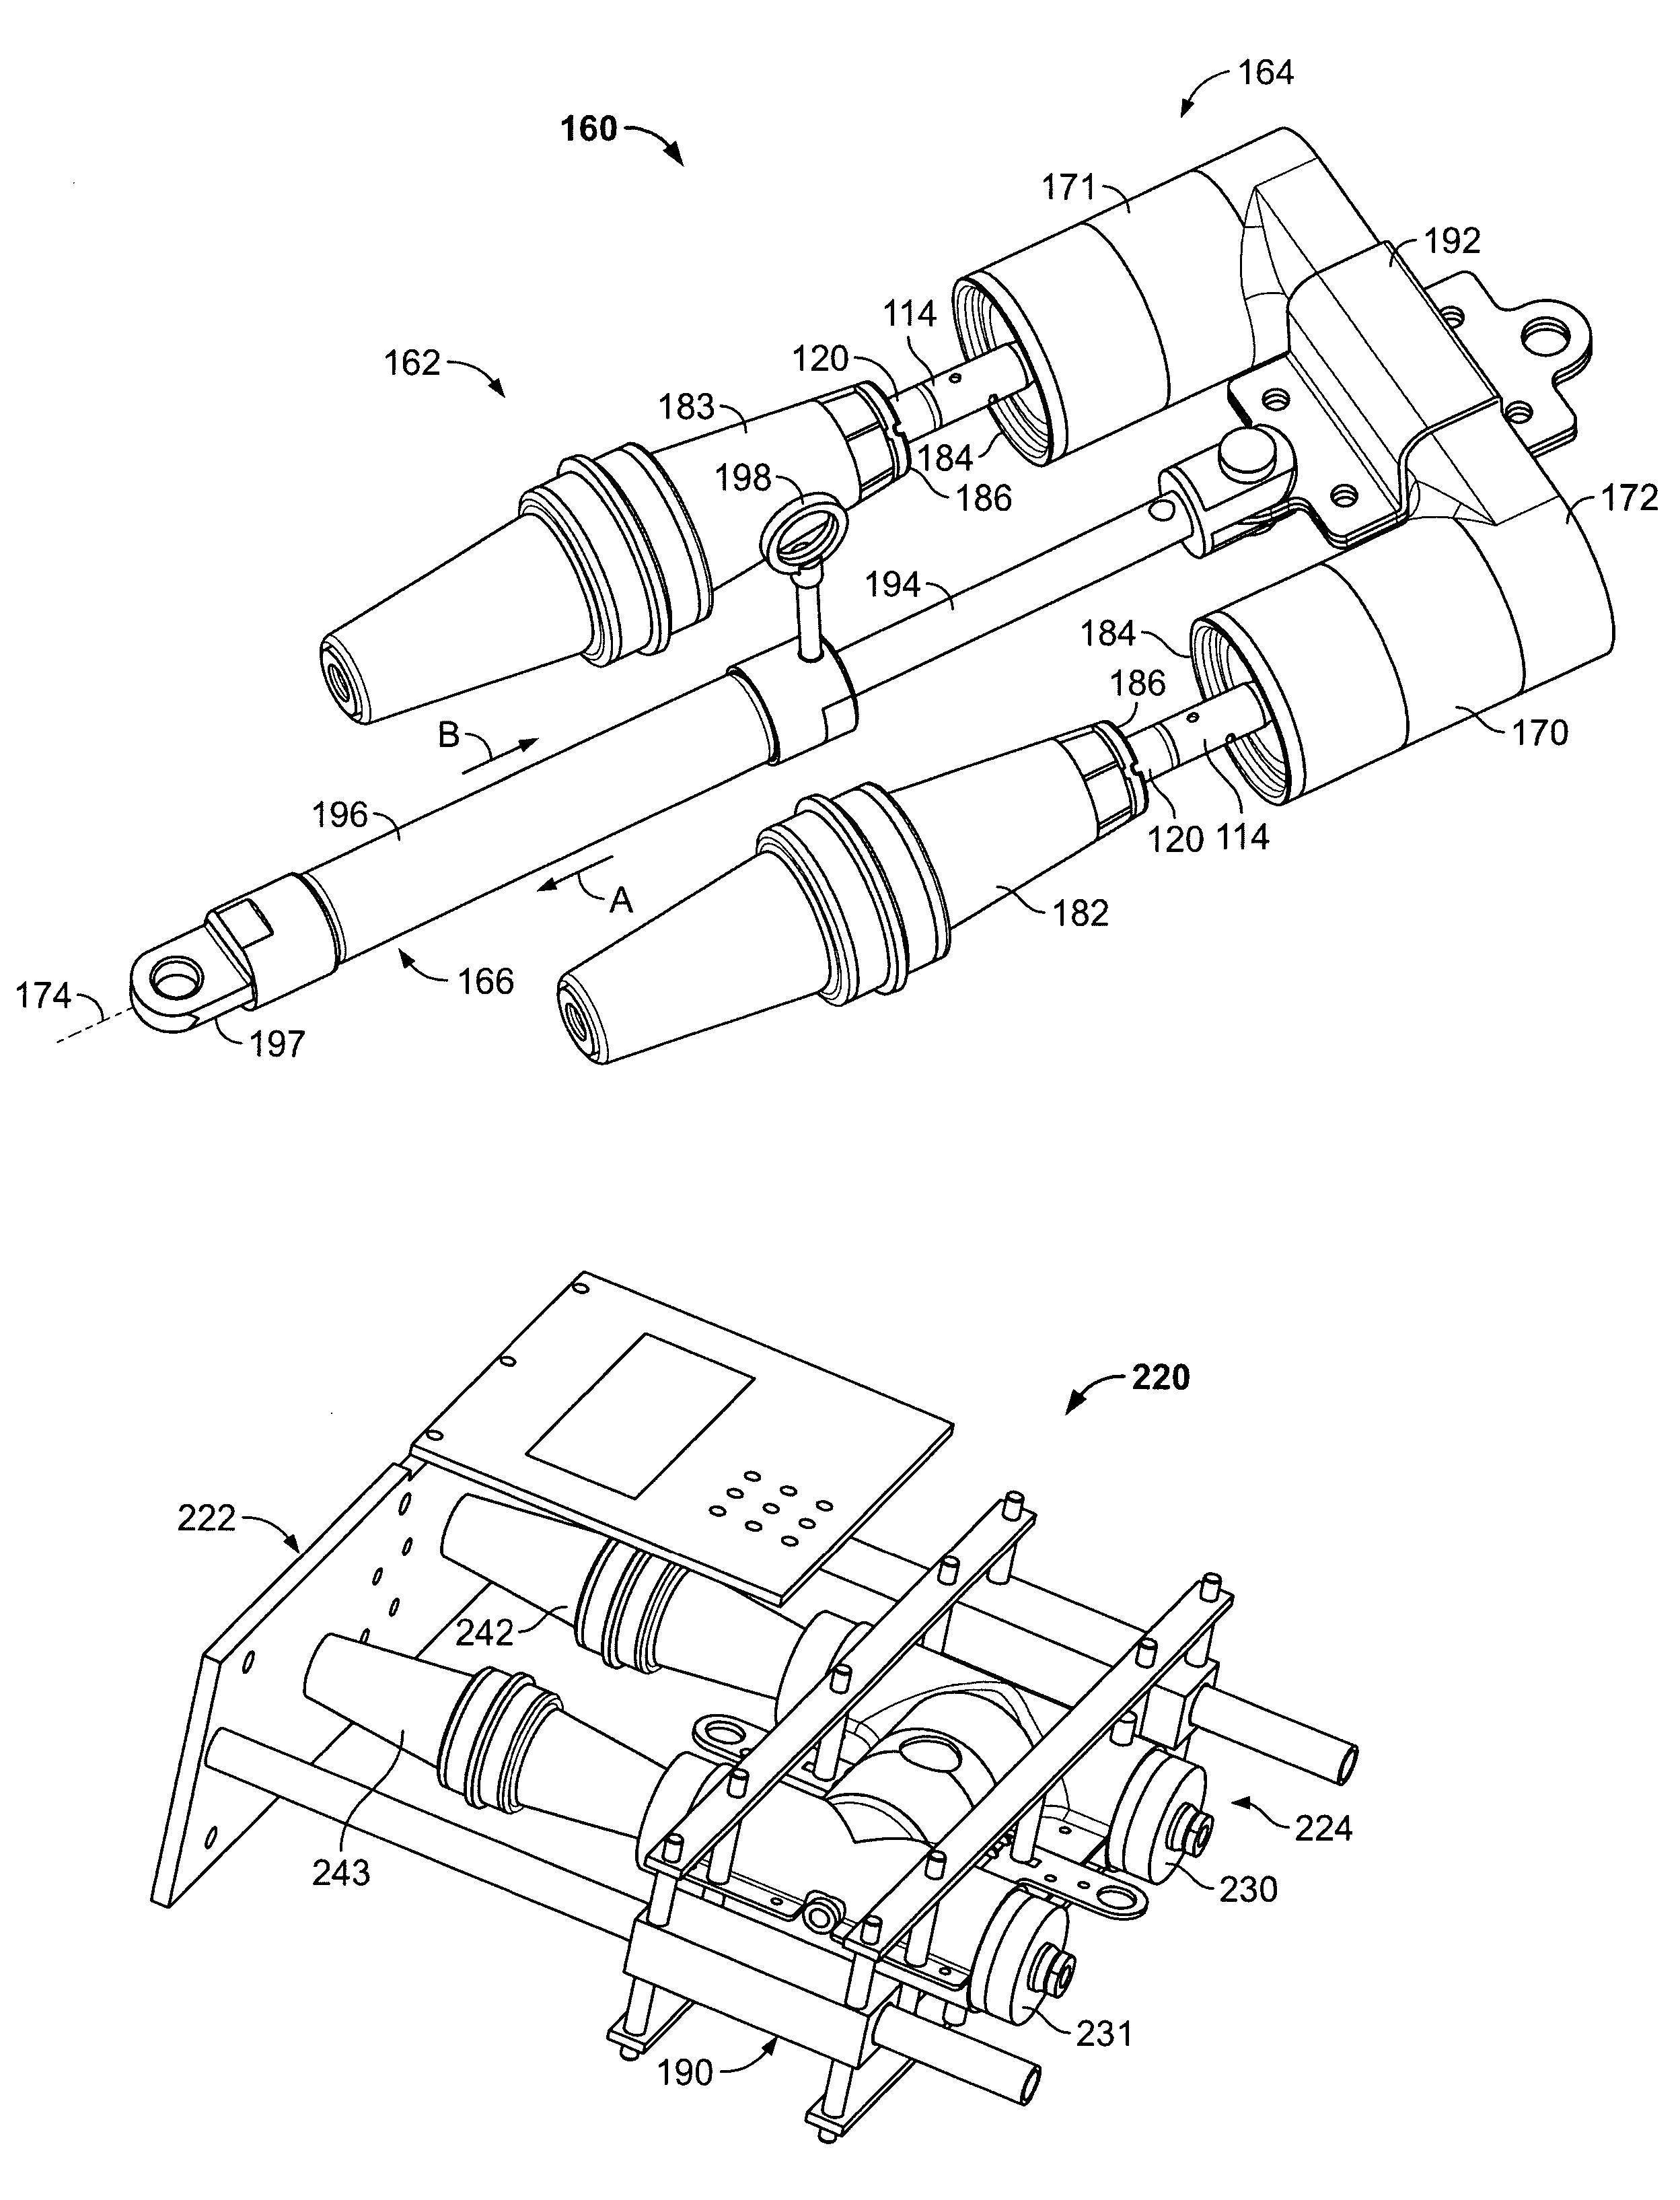 Apparatus, system and methods for deadfront visible loadbreak